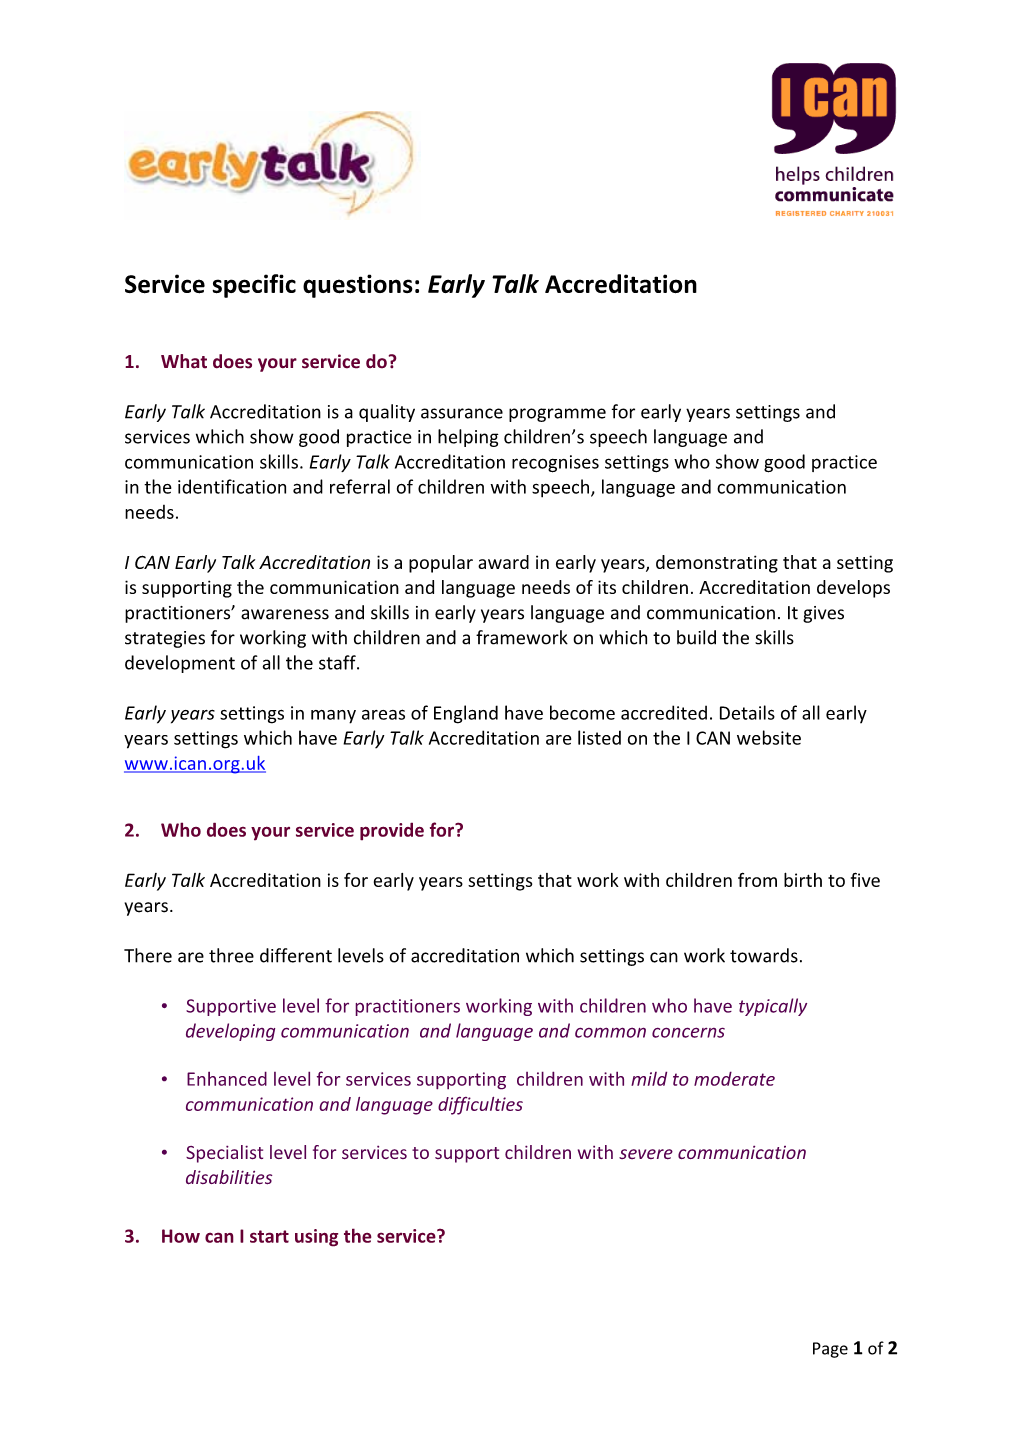 Service Specific Questions:Early Talk Accreditation